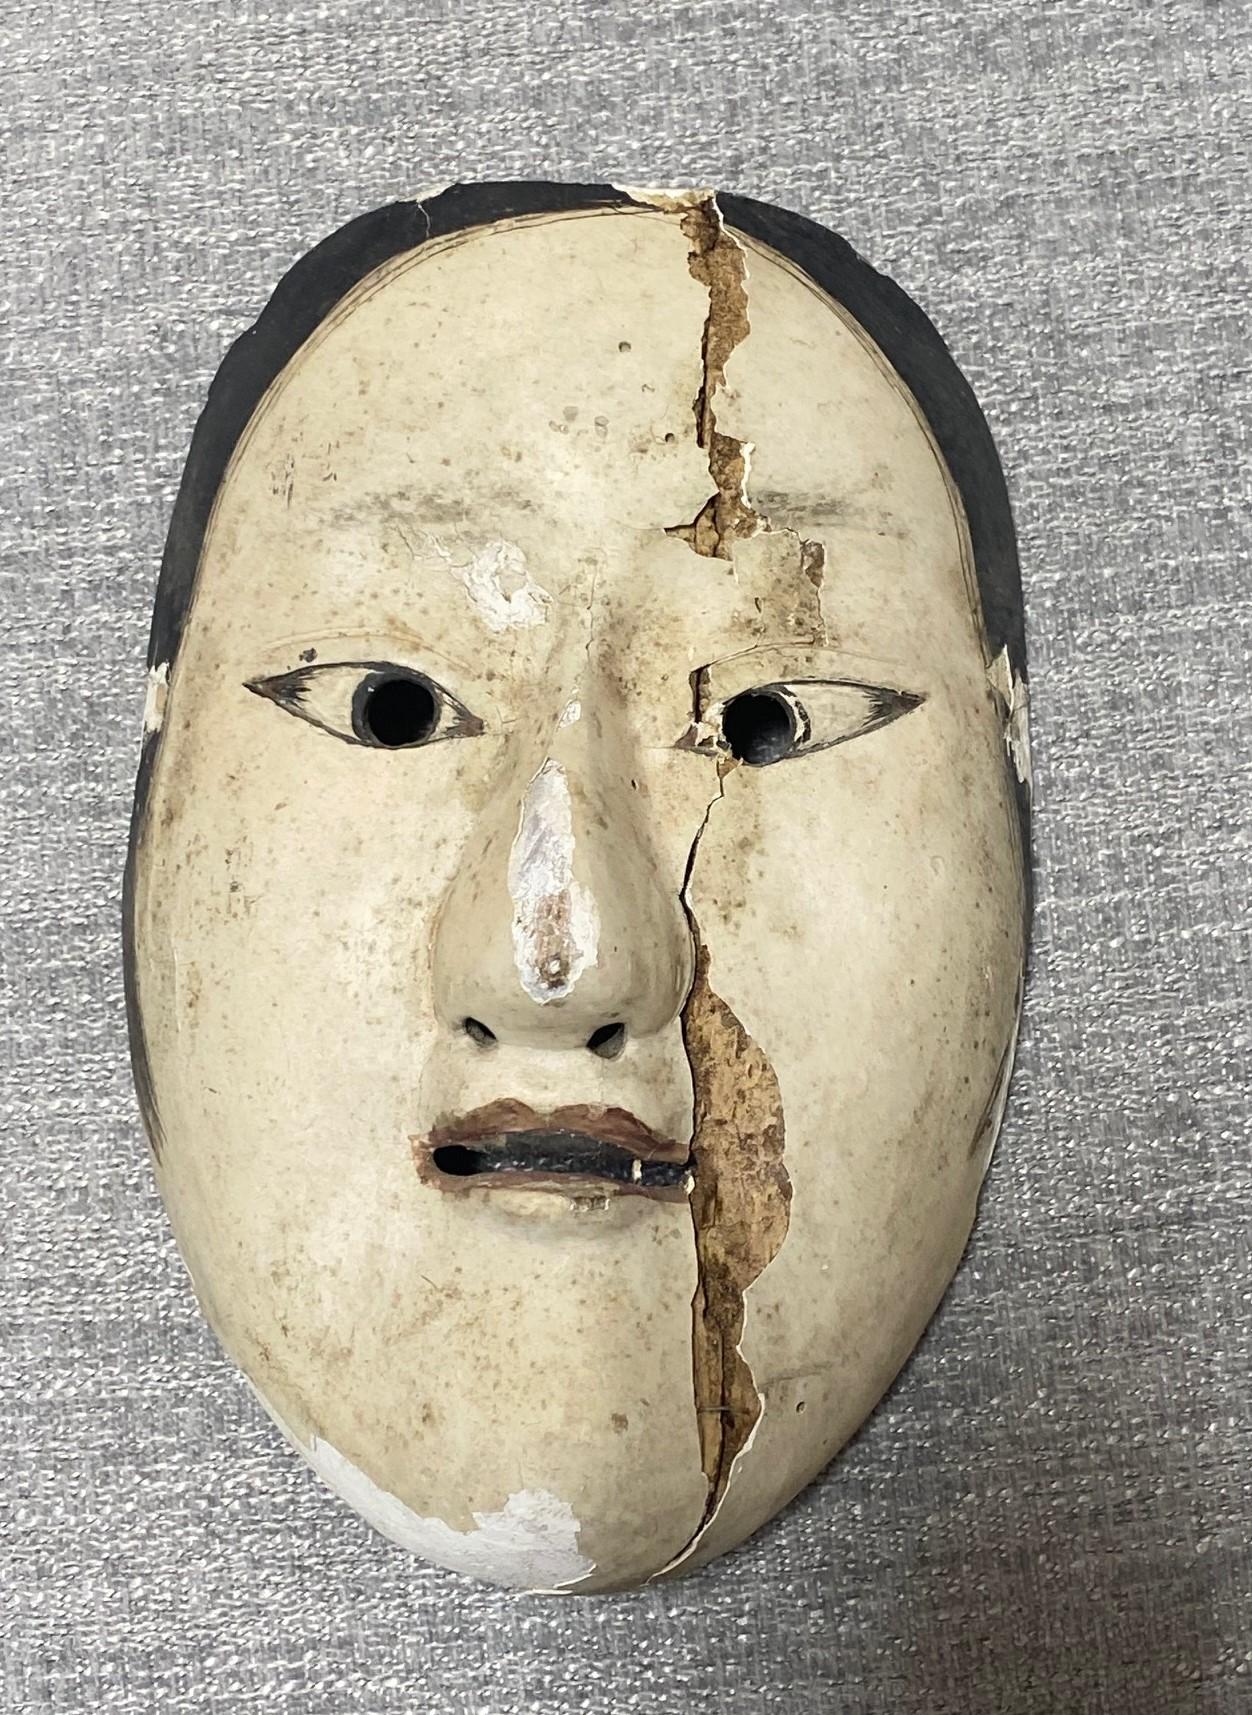 Japanese Antique Edo Signed Wood Noh Theater Mask Ko-Omote 17th-18th Century For Sale 6